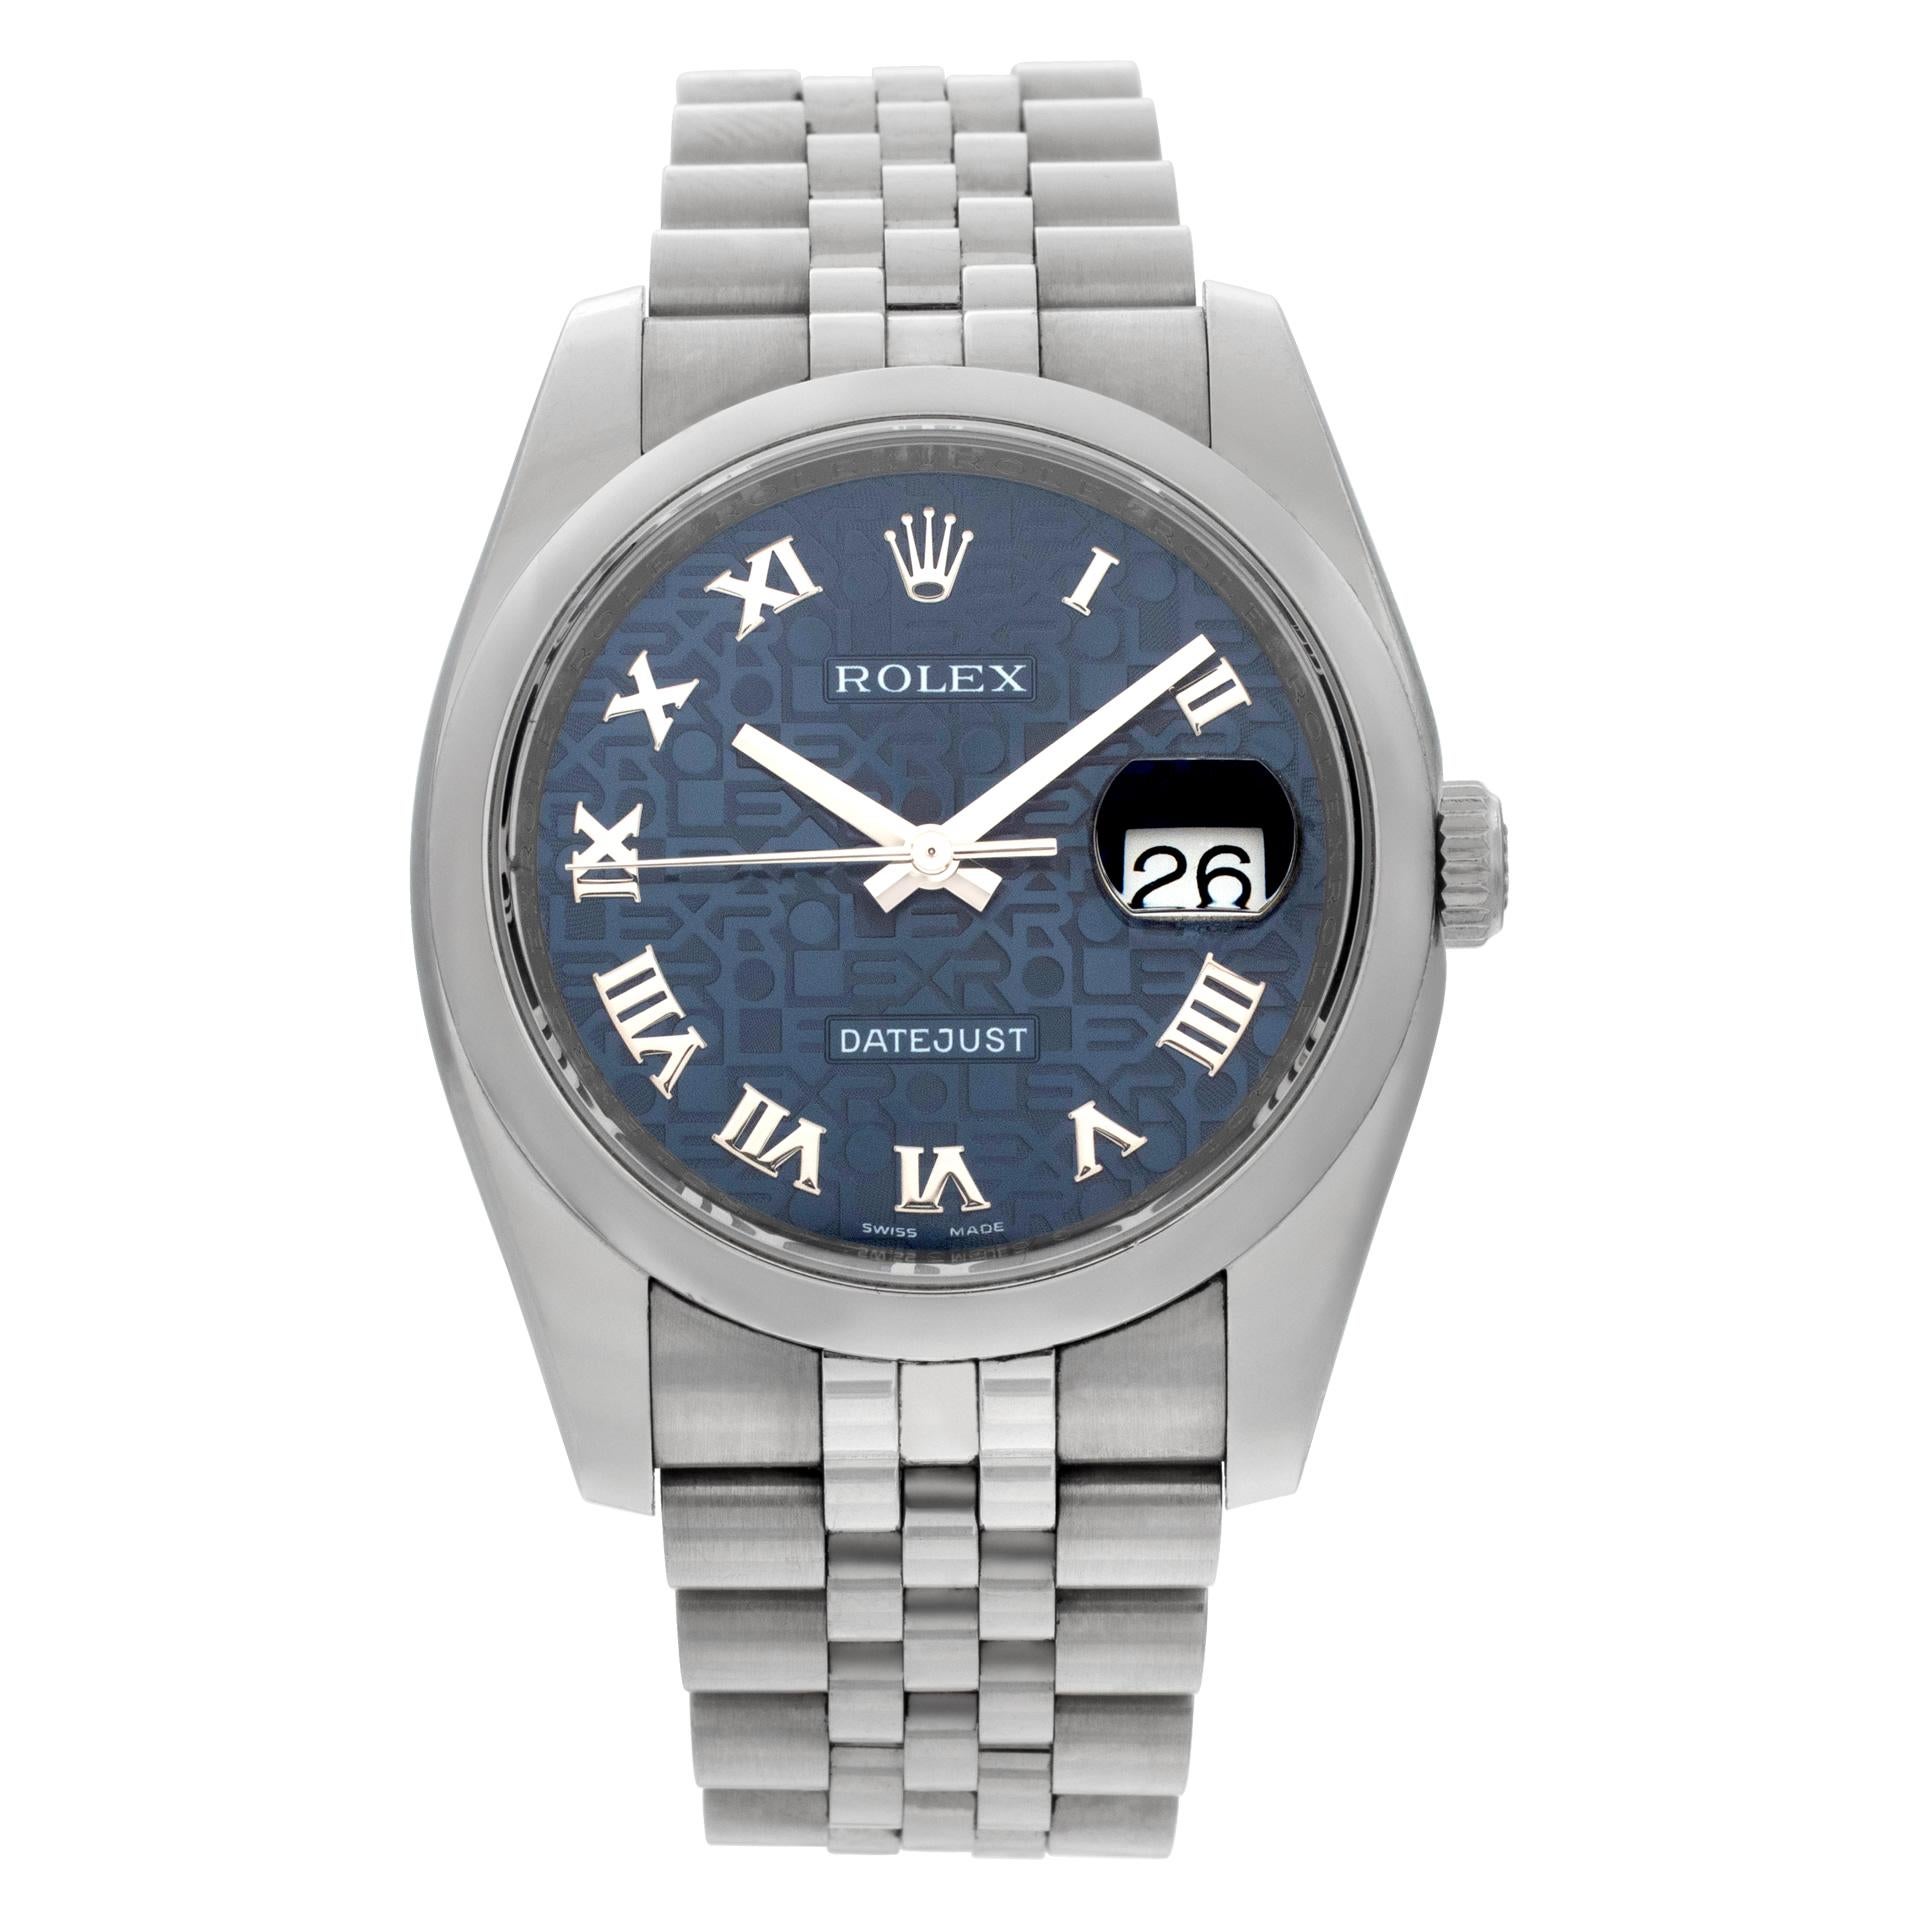 Rolex Datejust 116200 in Stainless Steel with a Blue dial 36mm Automatic watch For Sale